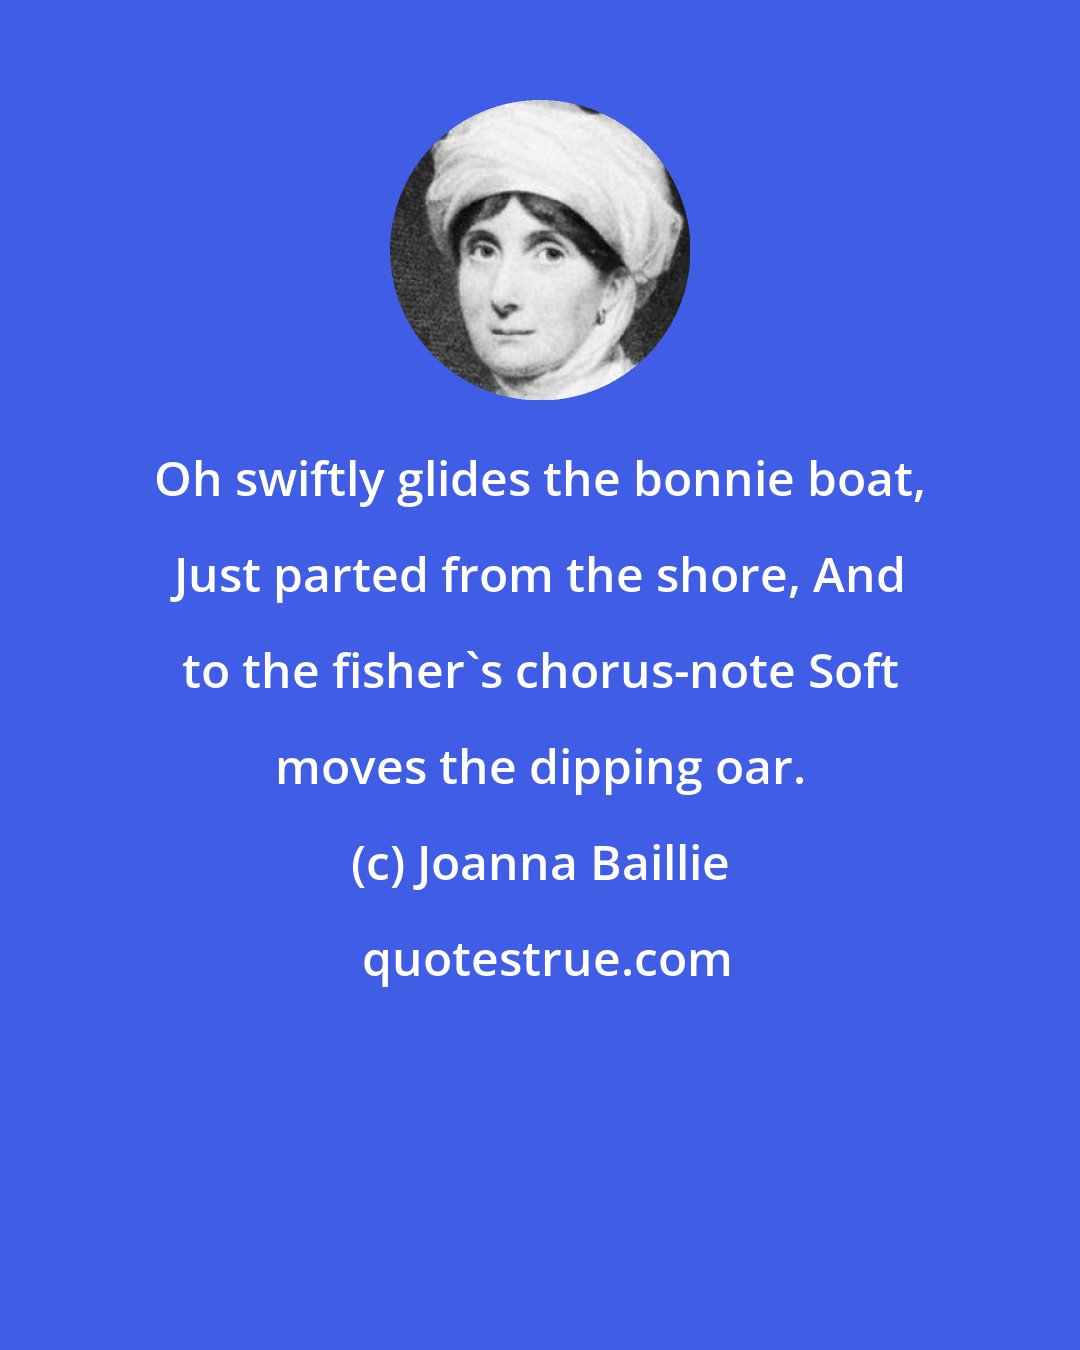 Joanna Baillie: Oh swiftly glides the bonnie boat, Just parted from the shore, And to the fisher's chorus-note Soft moves the dipping oar.